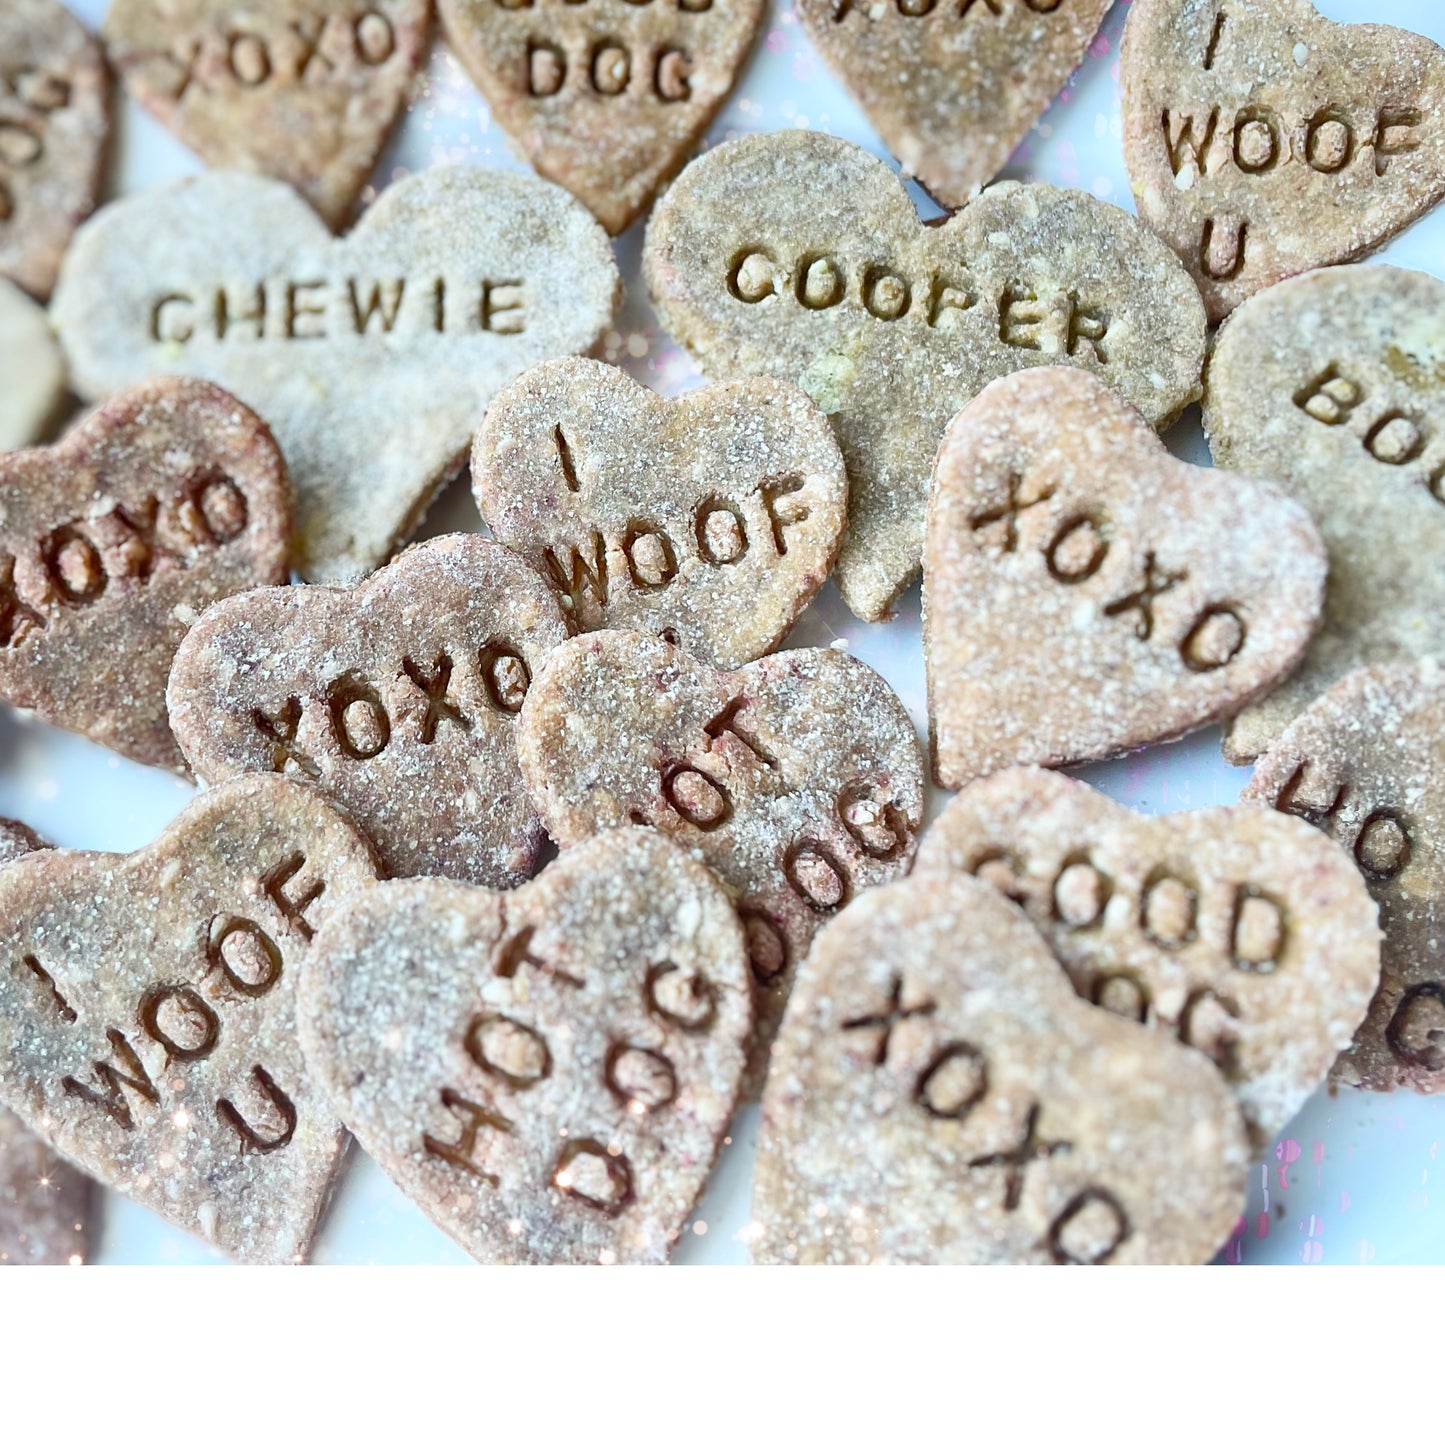 Valentine's Day heart-shaped dog cookies personalized with dogs' names as well as "XOXO," "HOT DOG," and "I WOOF YOU."